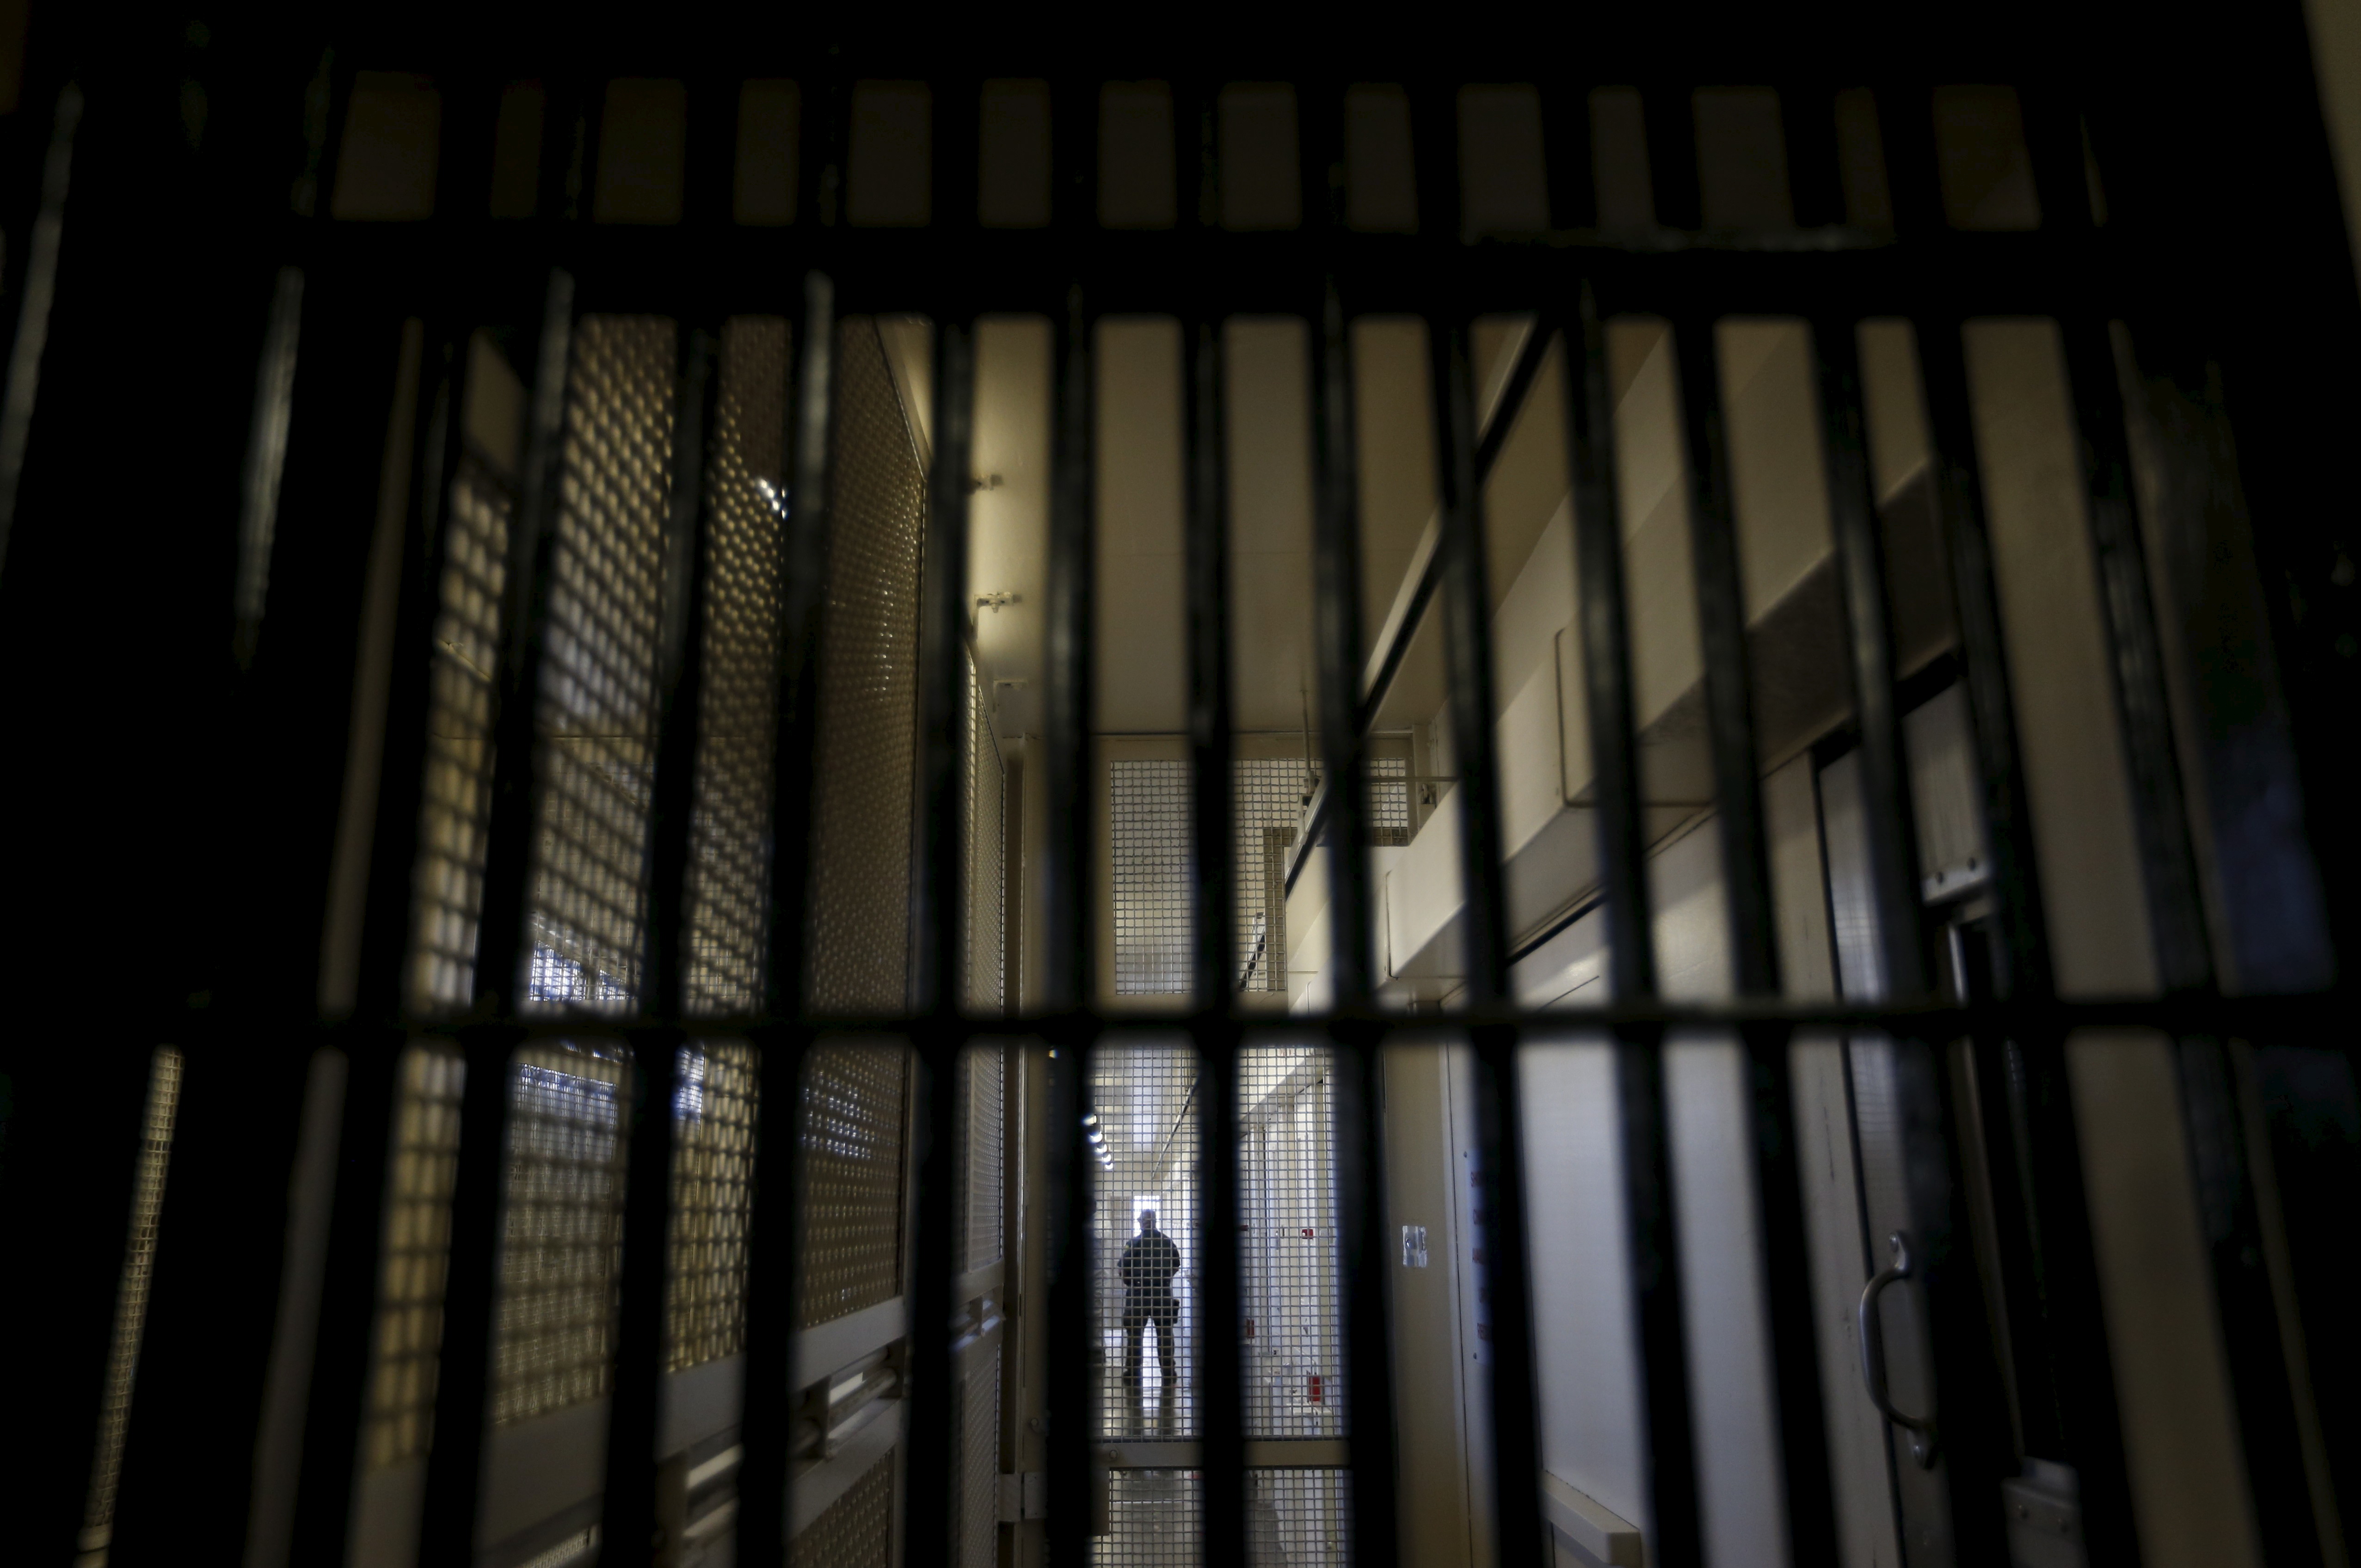 A guard stands behind bars at the Adjustment Center during a media tour of California's San Quentin State Prison in San Quentin, California